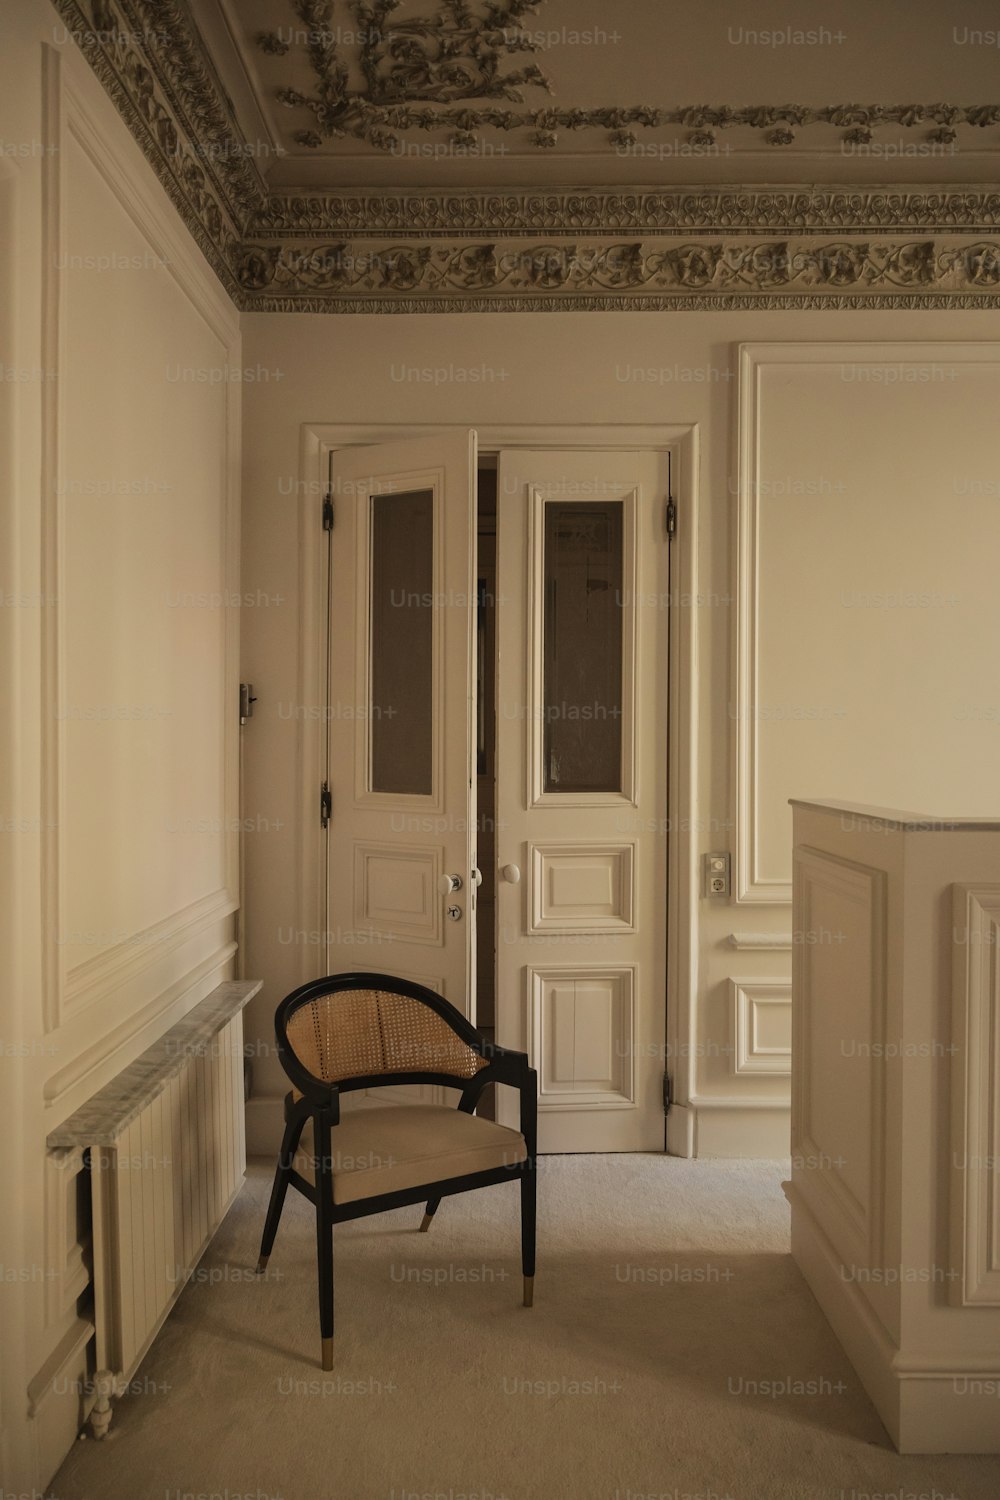 a chair sitting in a room next to two doors